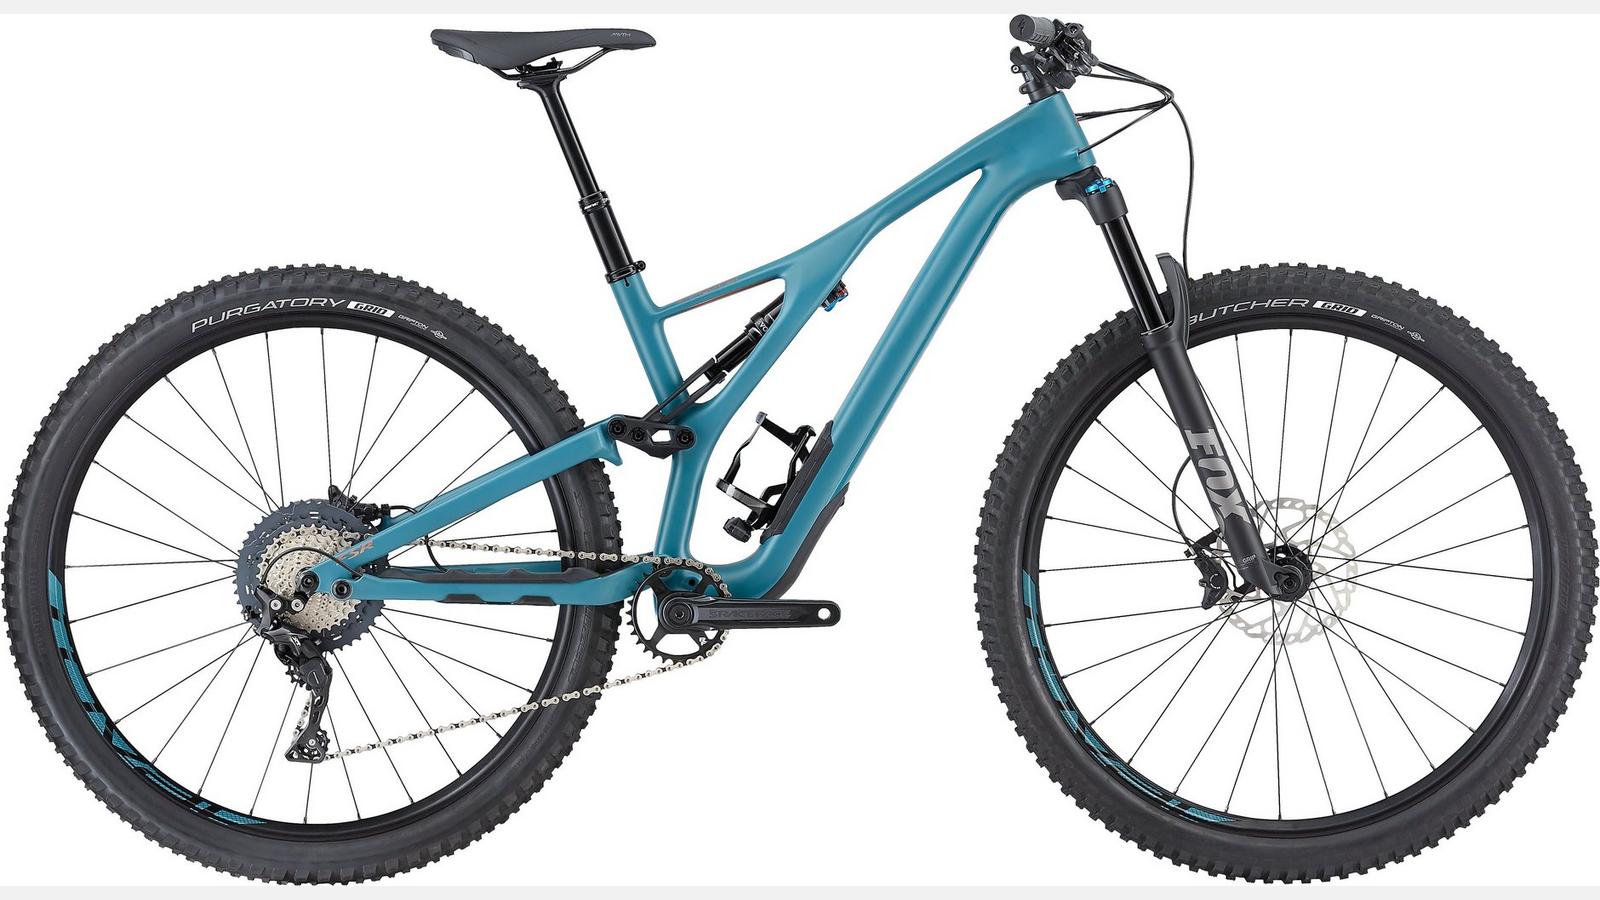 Paint for 2019 Specialized Women's Stumpjumper ST Comp Carbon 29 - Satin Dusty Turquoise